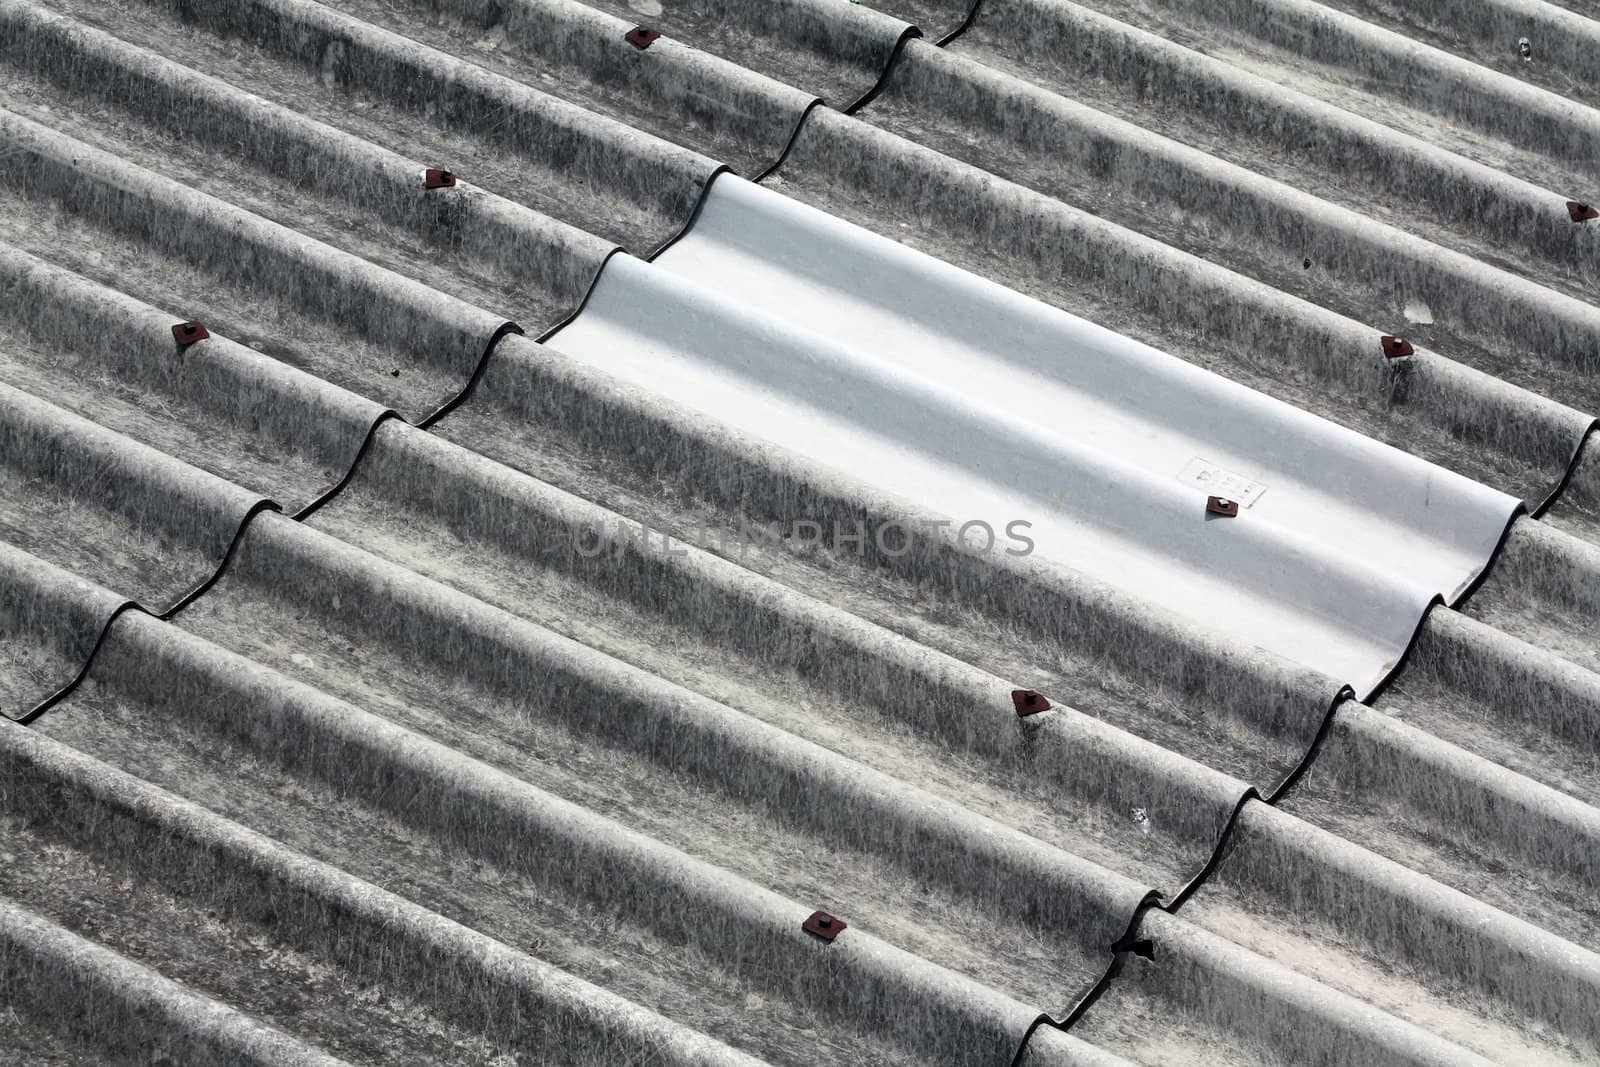 Roof Tile Pattern by phanlop88